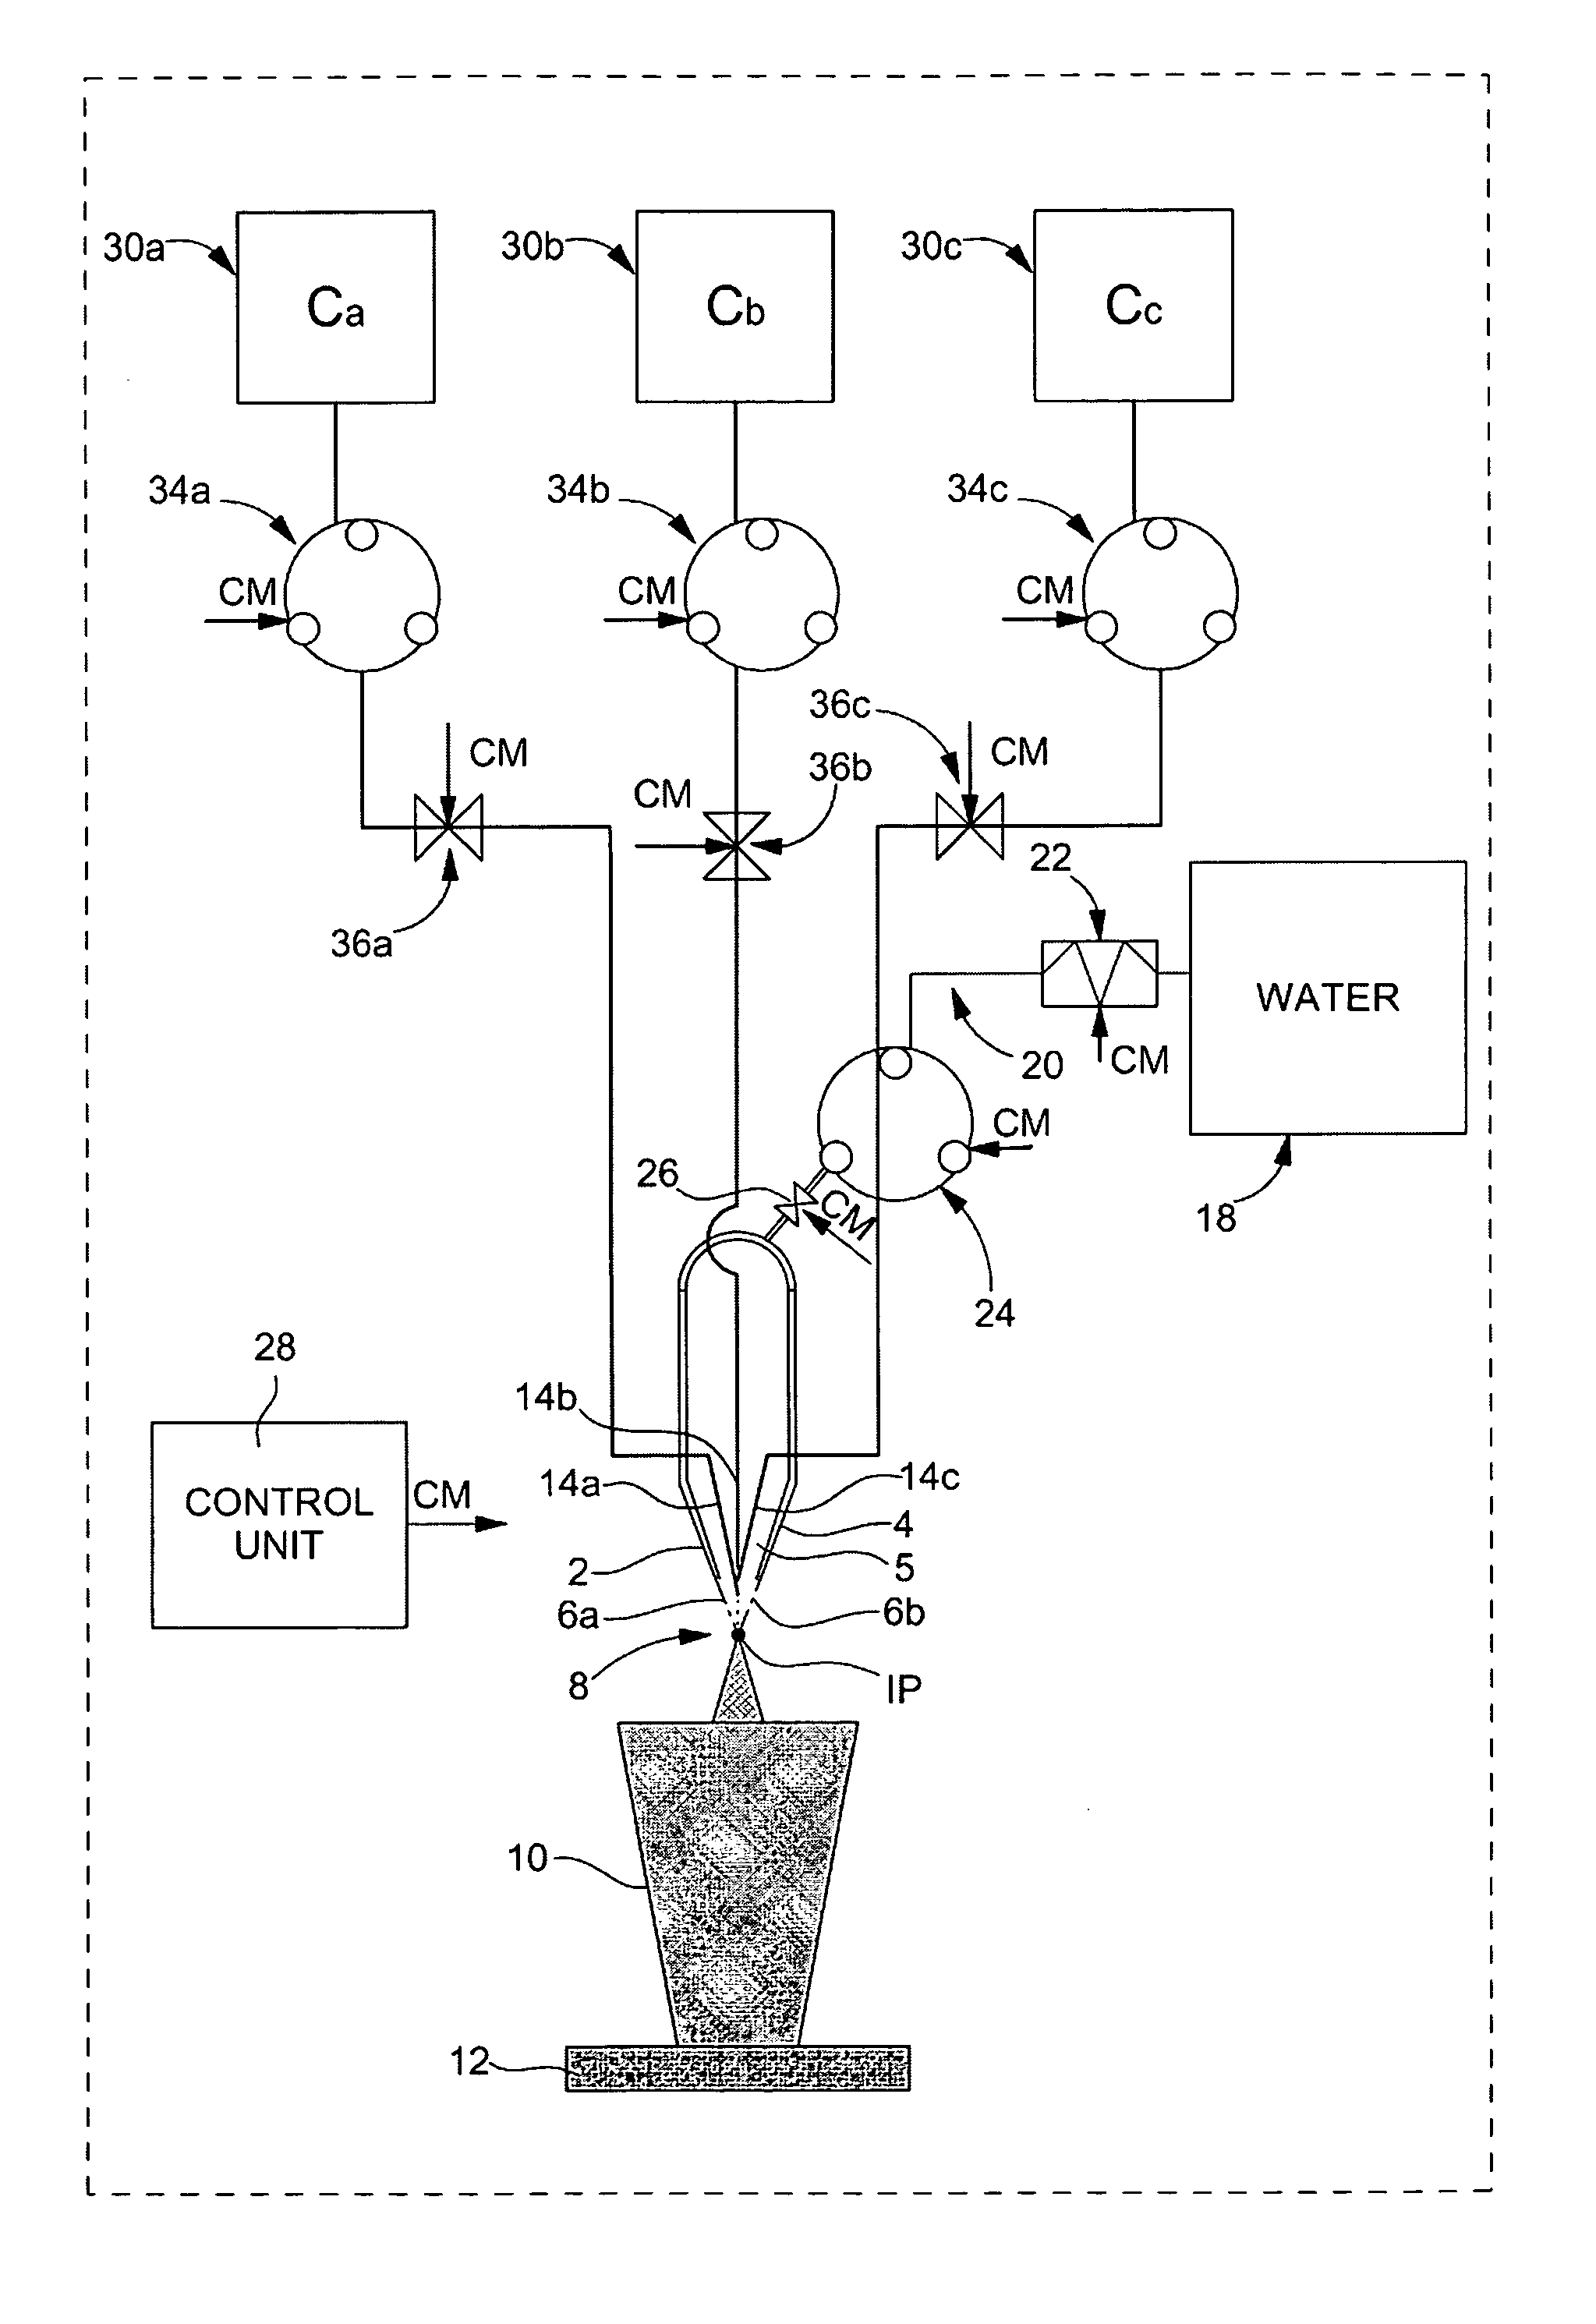 Method and system for dispensing hot and cold beverages from liquid concentrates